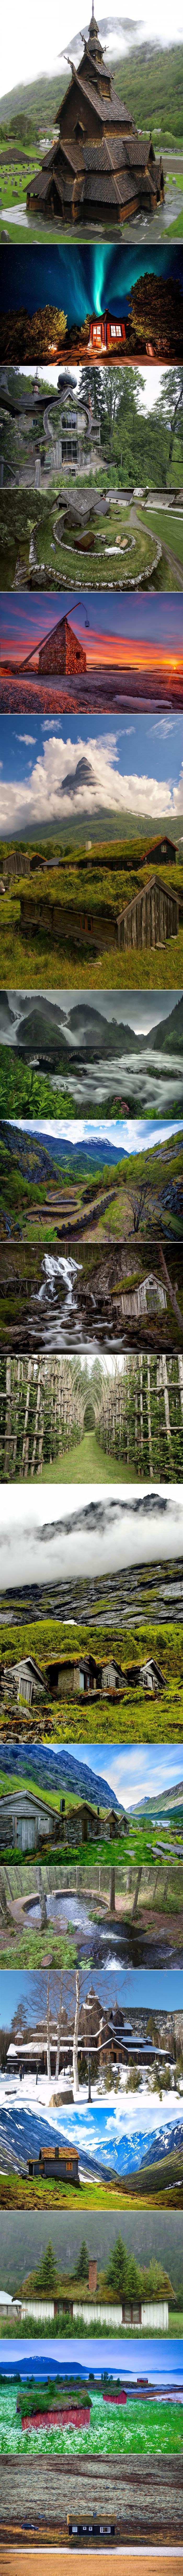 a photographic tour of beautiful norwegian architecture